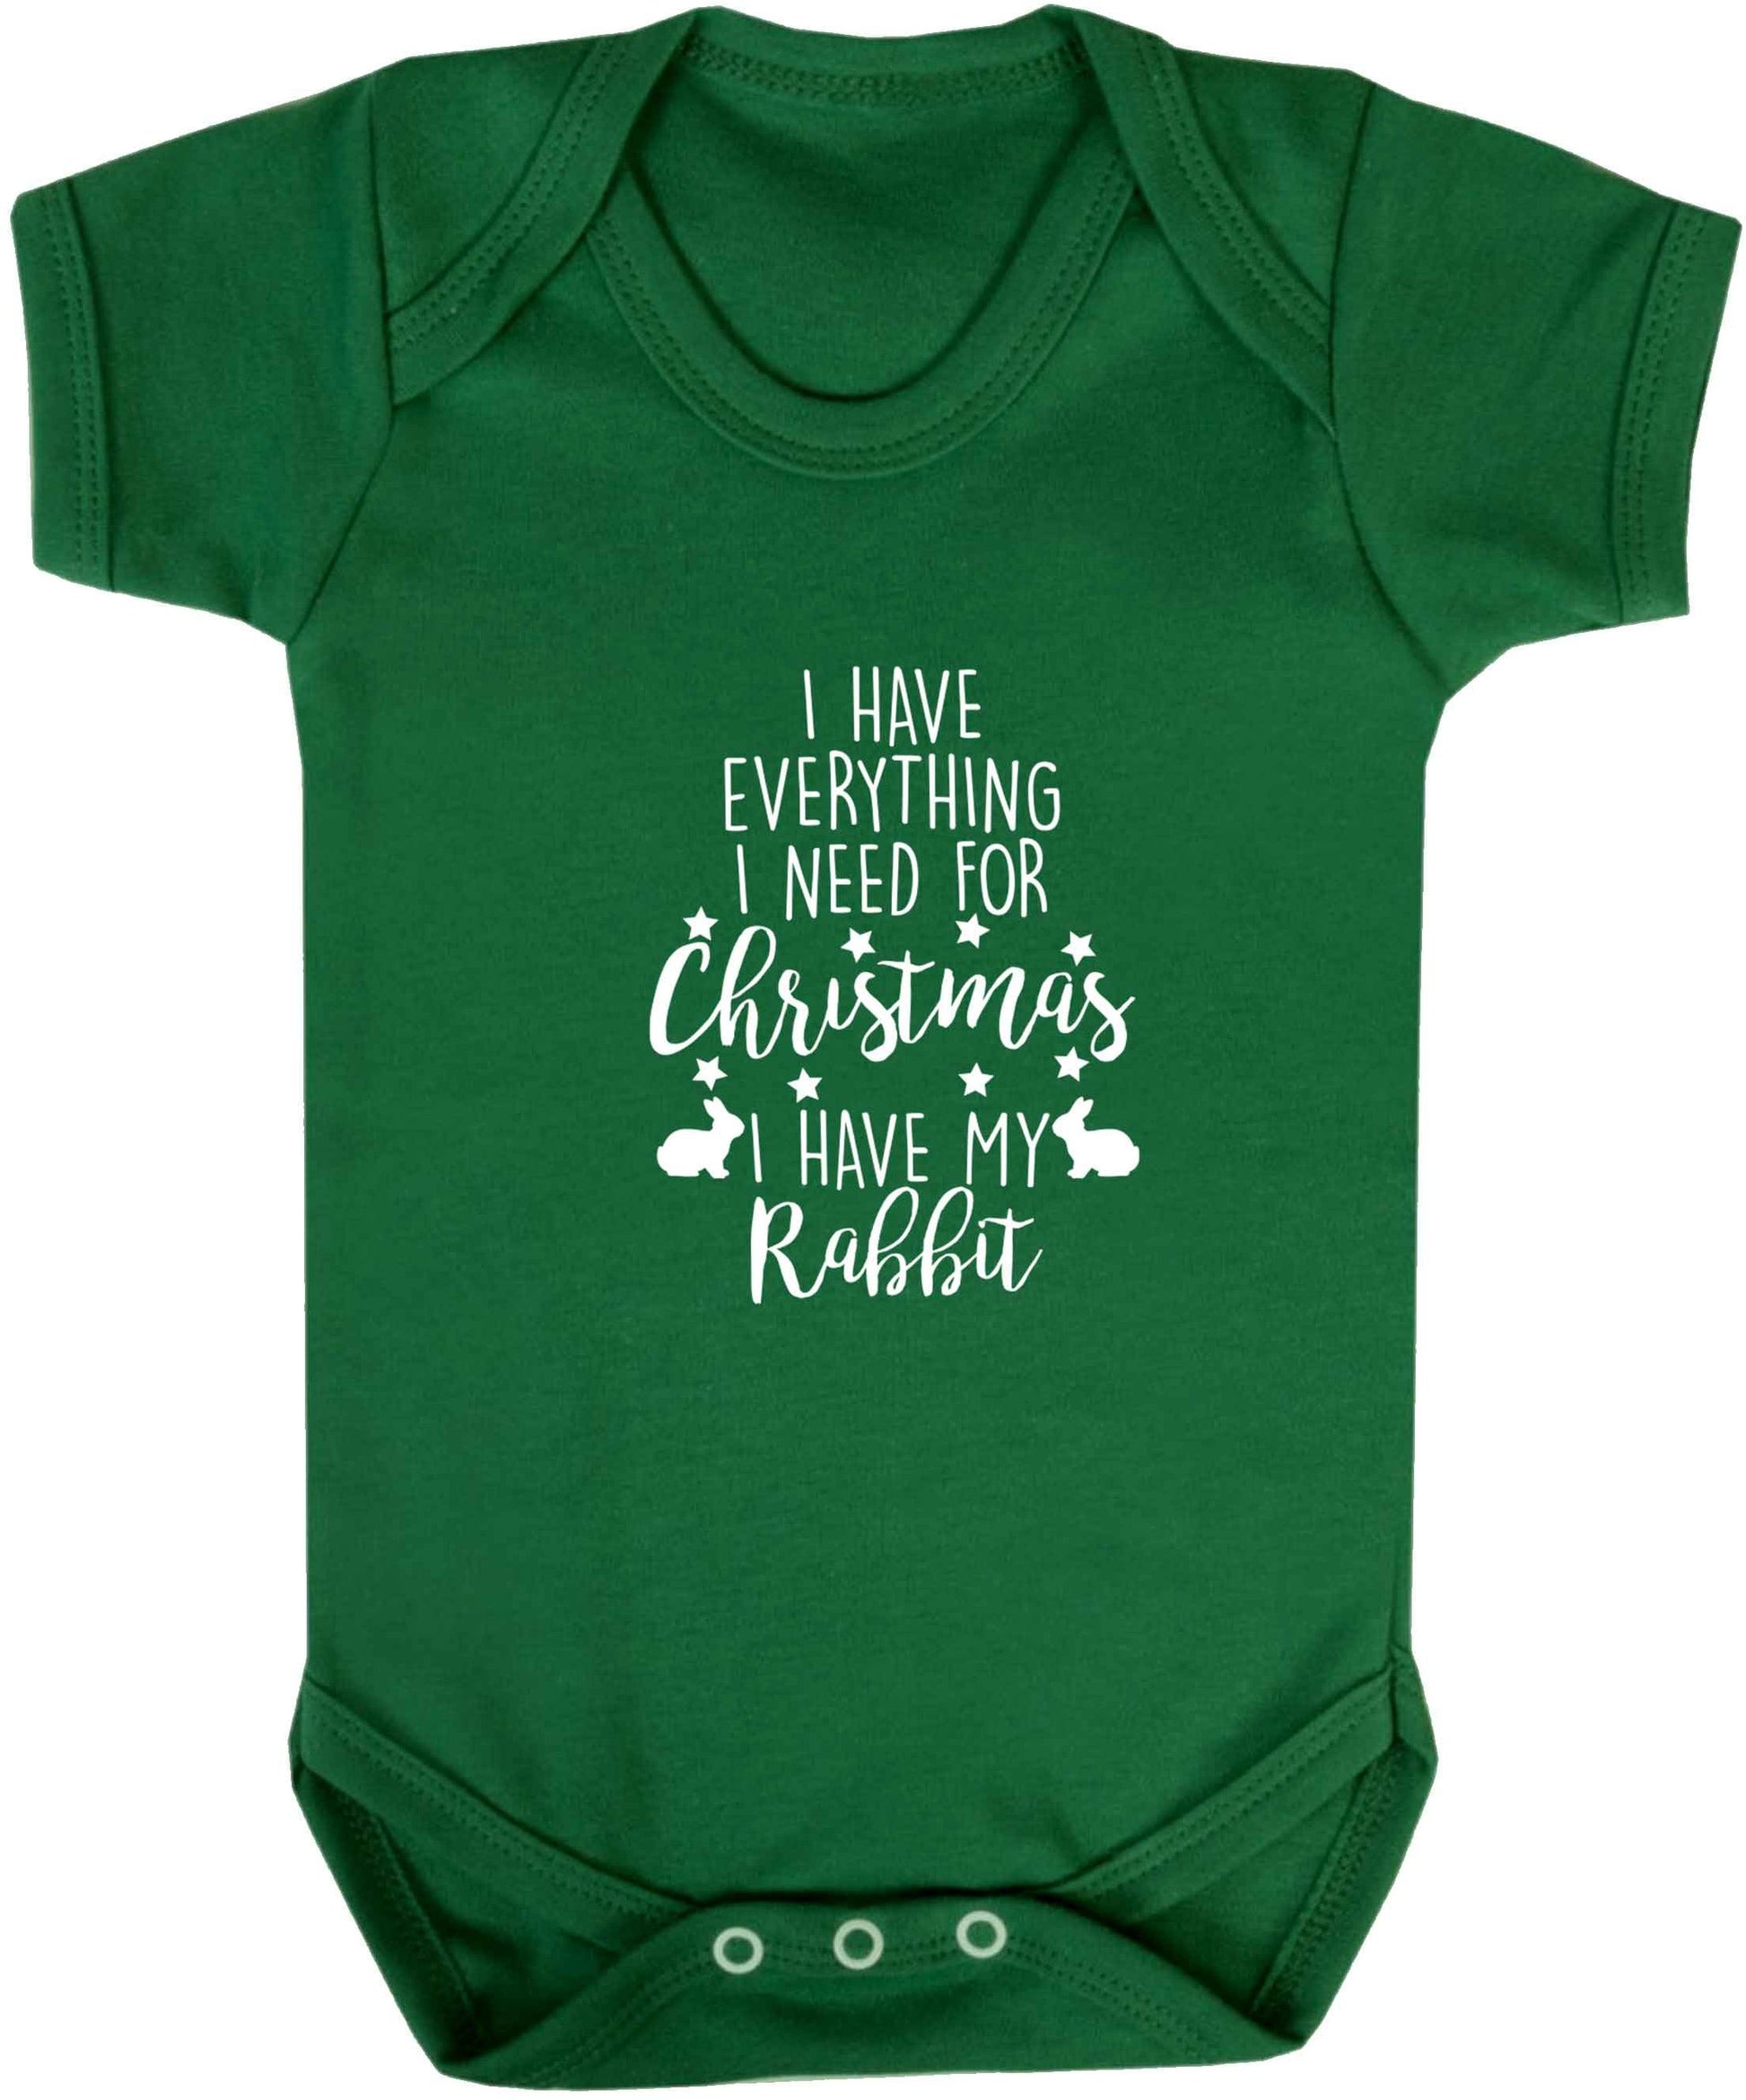 I have everything I need for Christmas I have my rabbit baby vest green 18-24 months